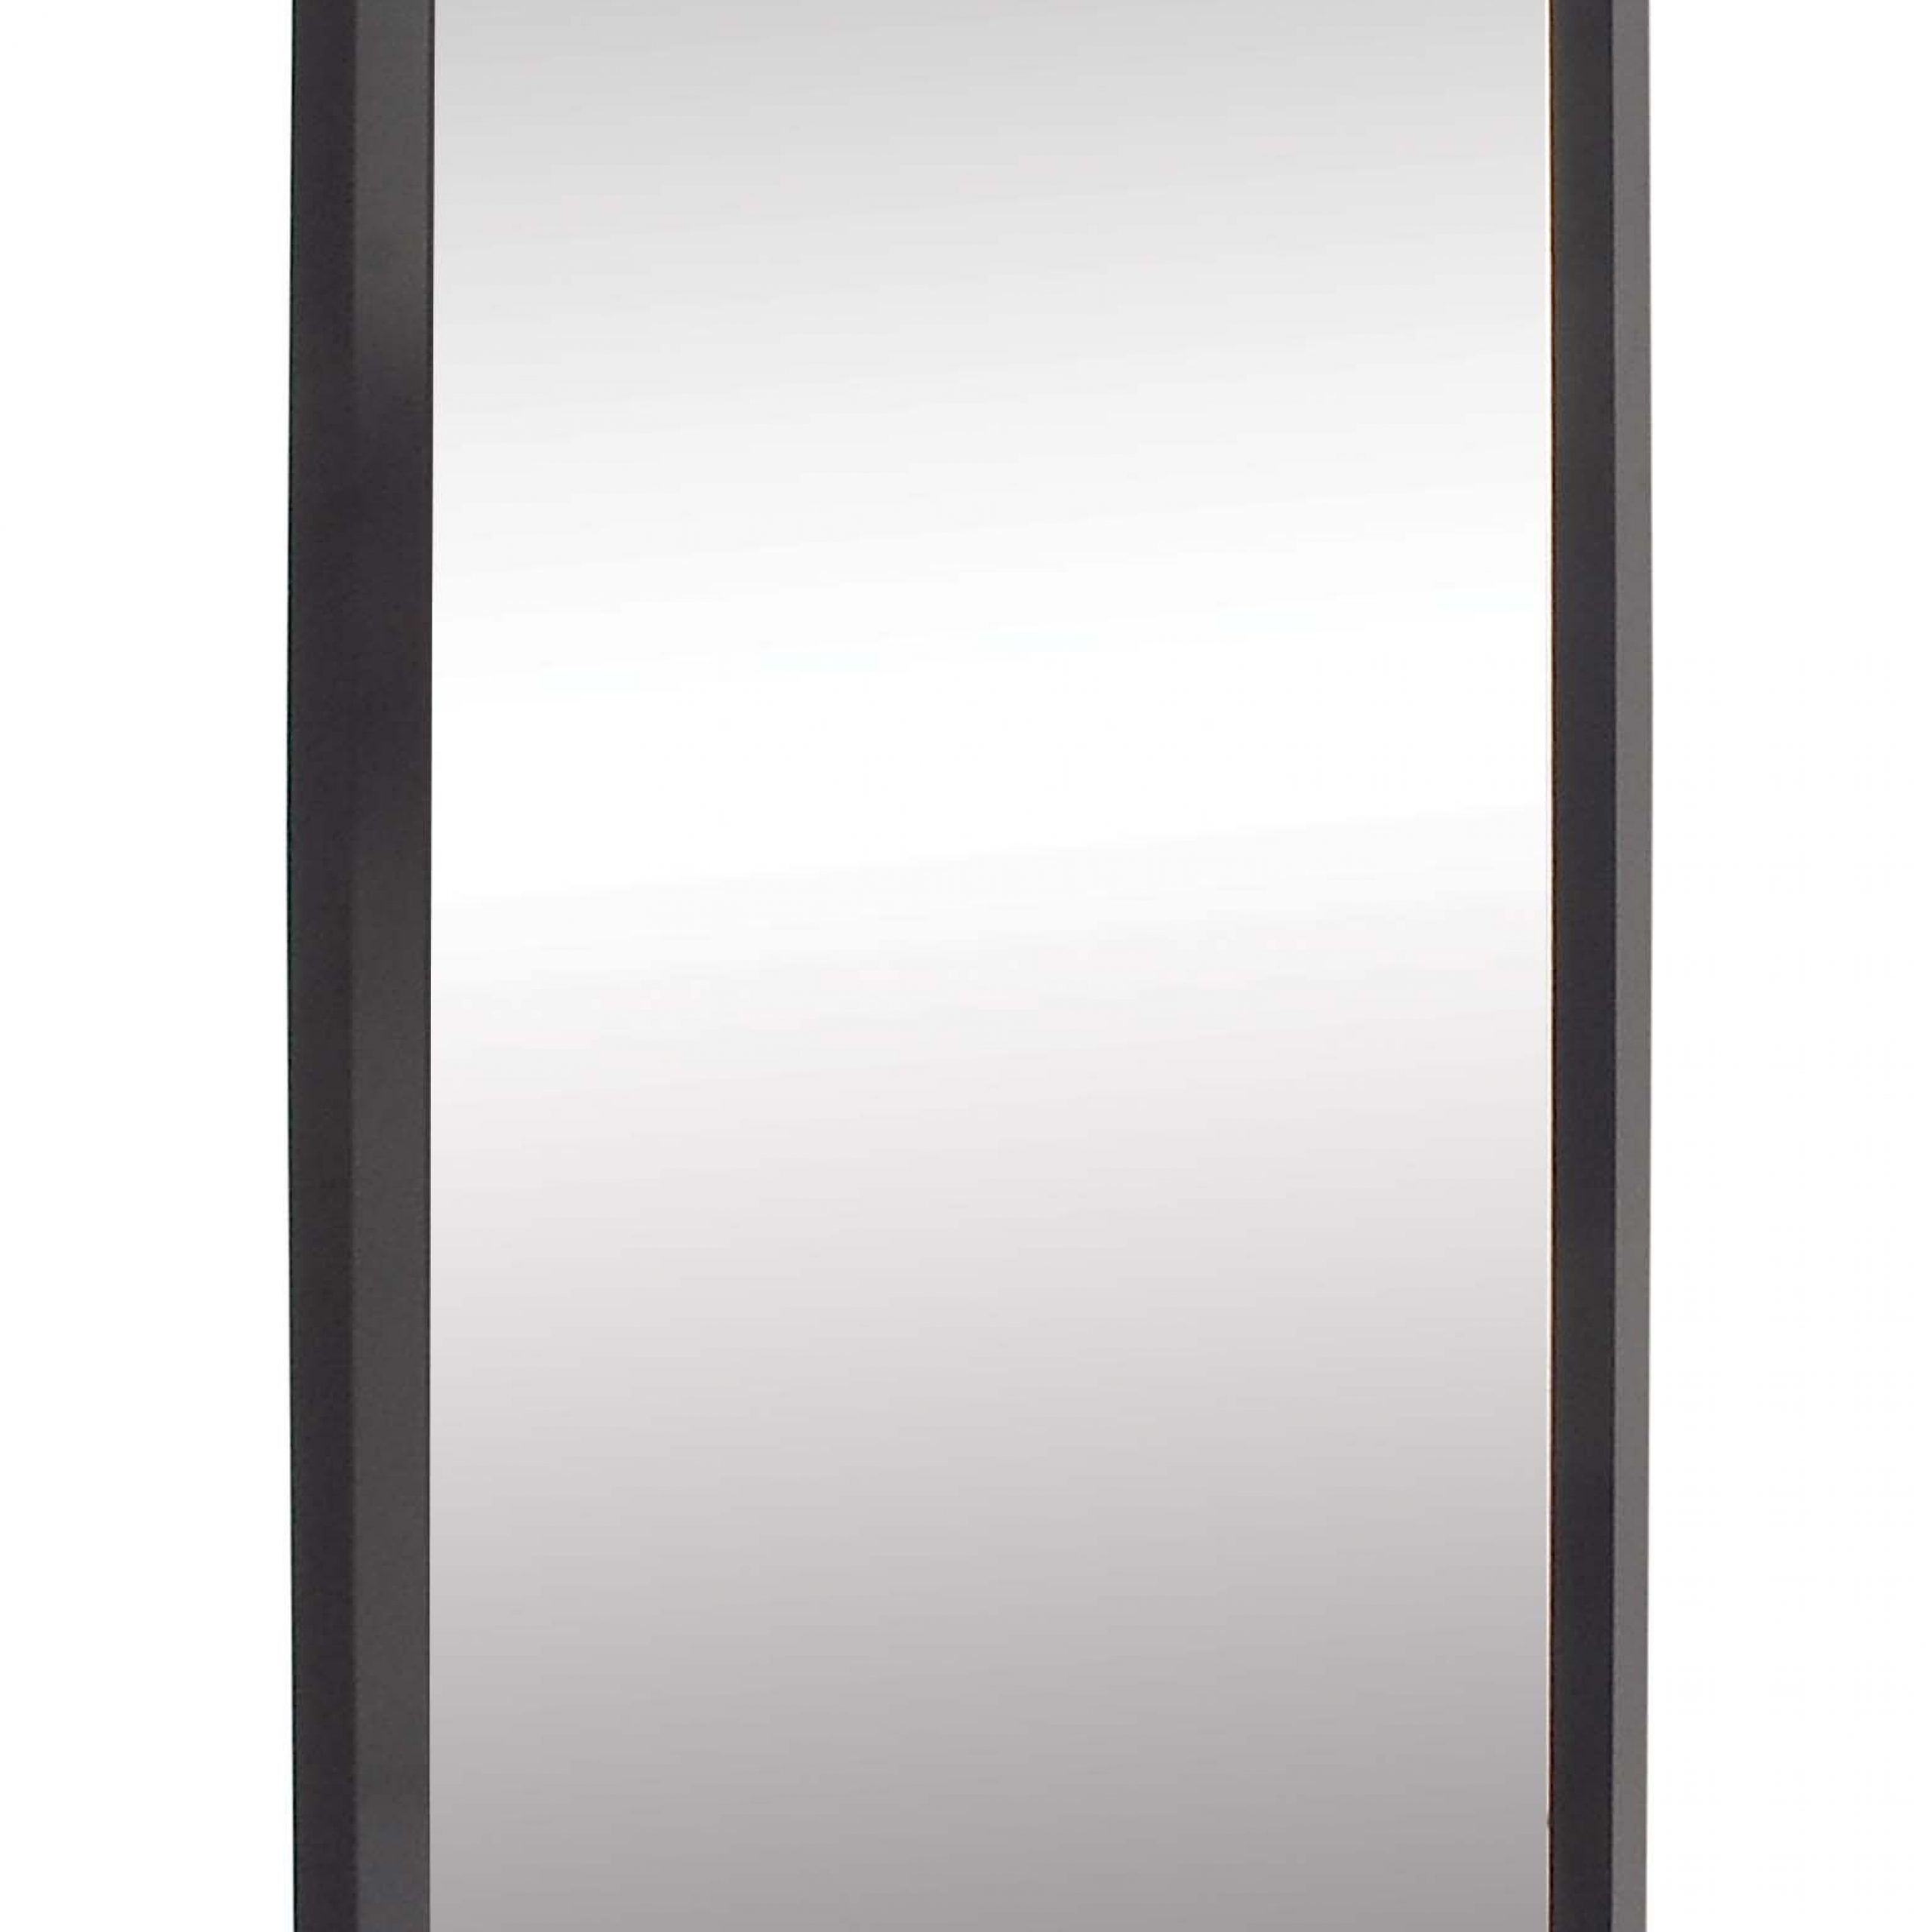 Decmode Contemporary 47 X 20 Inch Wooden Rectangular Wall Mirror, Black In Recent Black Beaded Rectangular Wall Mirrors (View 9 of 15)